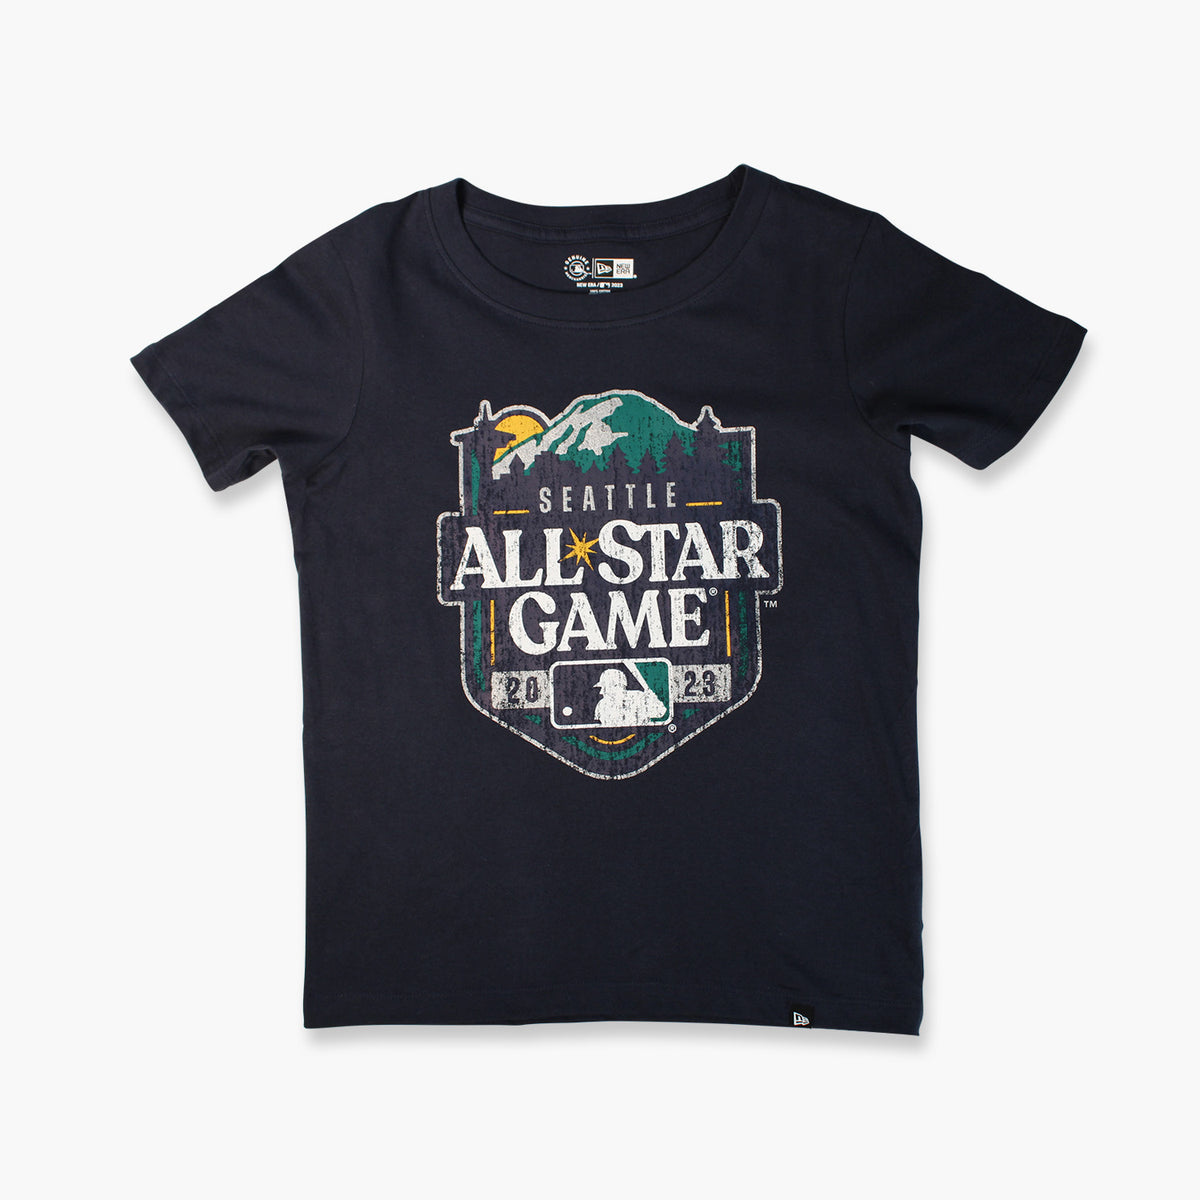 2023 MLB All-Star gear: Where to get jerseys, t-shirts, hats